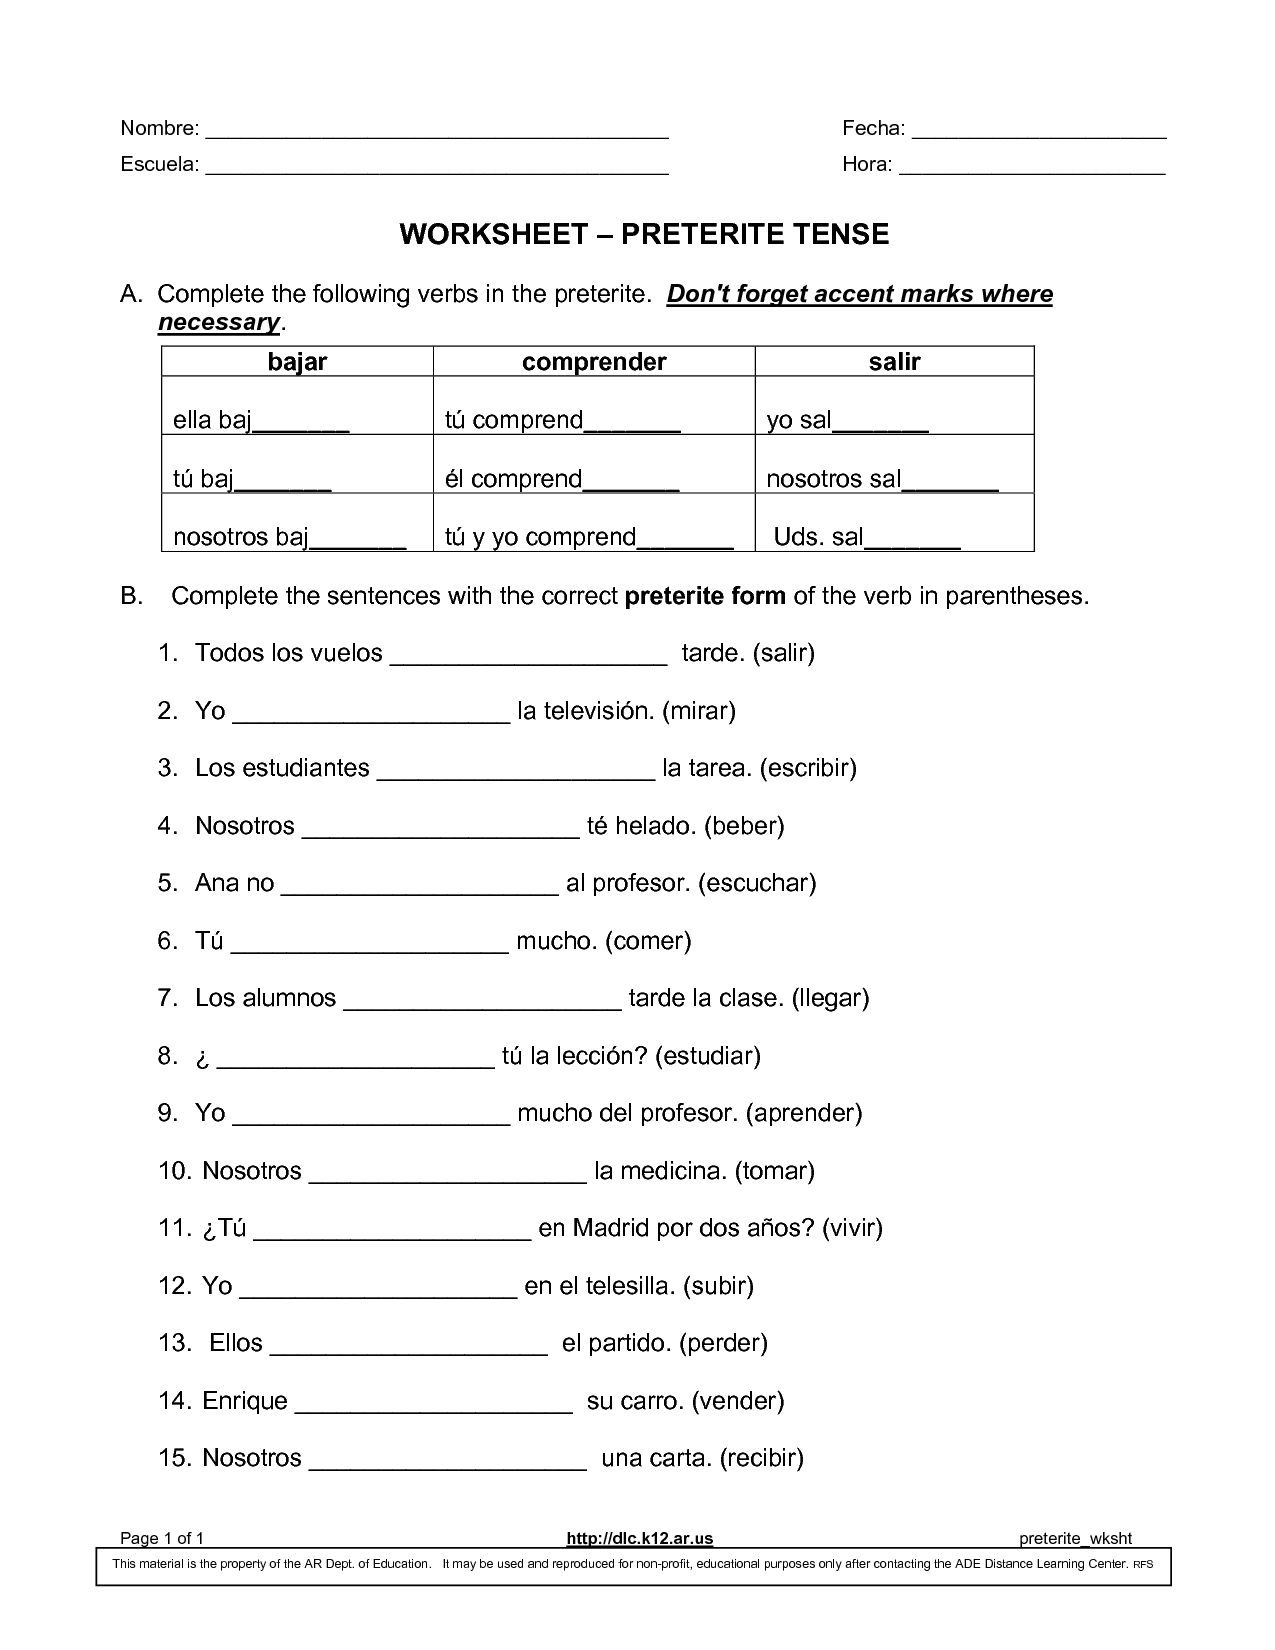 Verbs That Change Meaning In The Preterite Worksheet Pdf